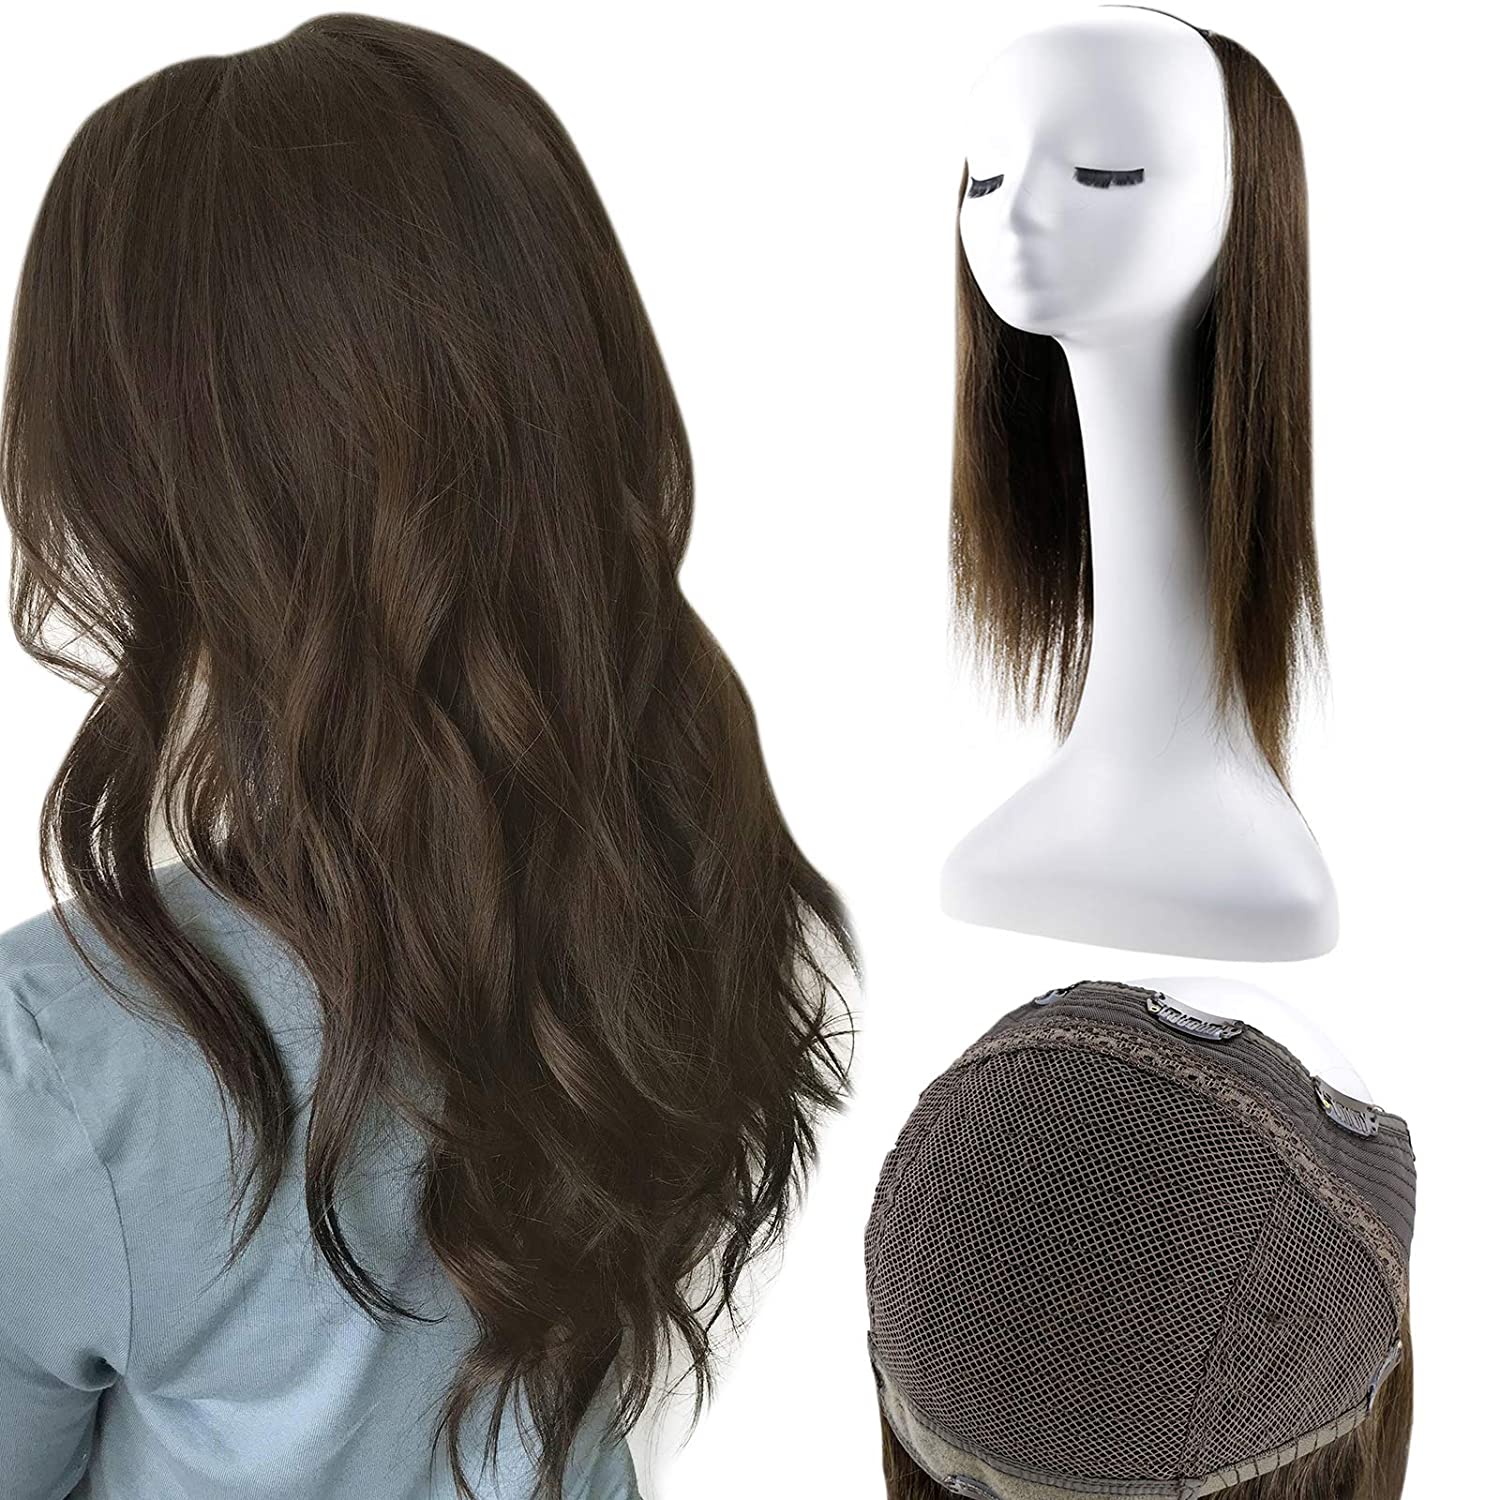 U Part Wig Real Hair Clip In Full Head One Piece Straight Extensions Remy One Piece Hair Extensions Color #2 Darkest Brown - FShine Shop